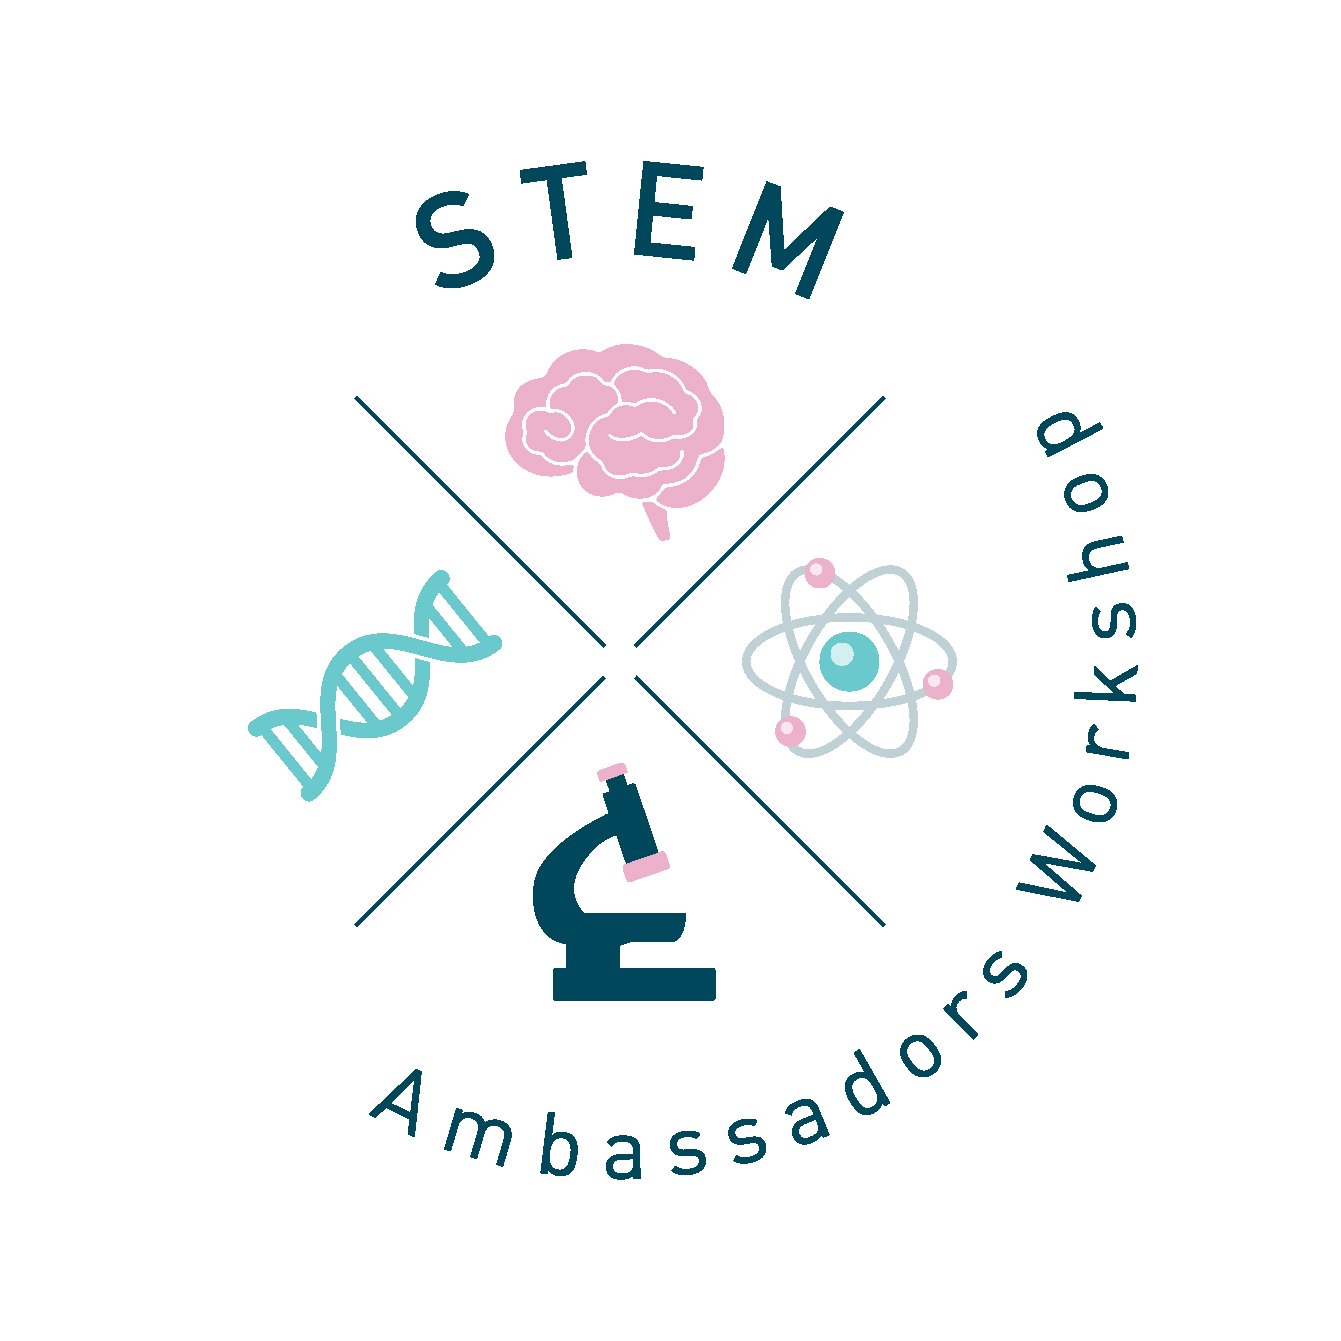 Discover how the STEM subjects you learn in school can lead to exciting careers with inspiring video stories & lesson plans: https://t.co/h60zaFQvn1